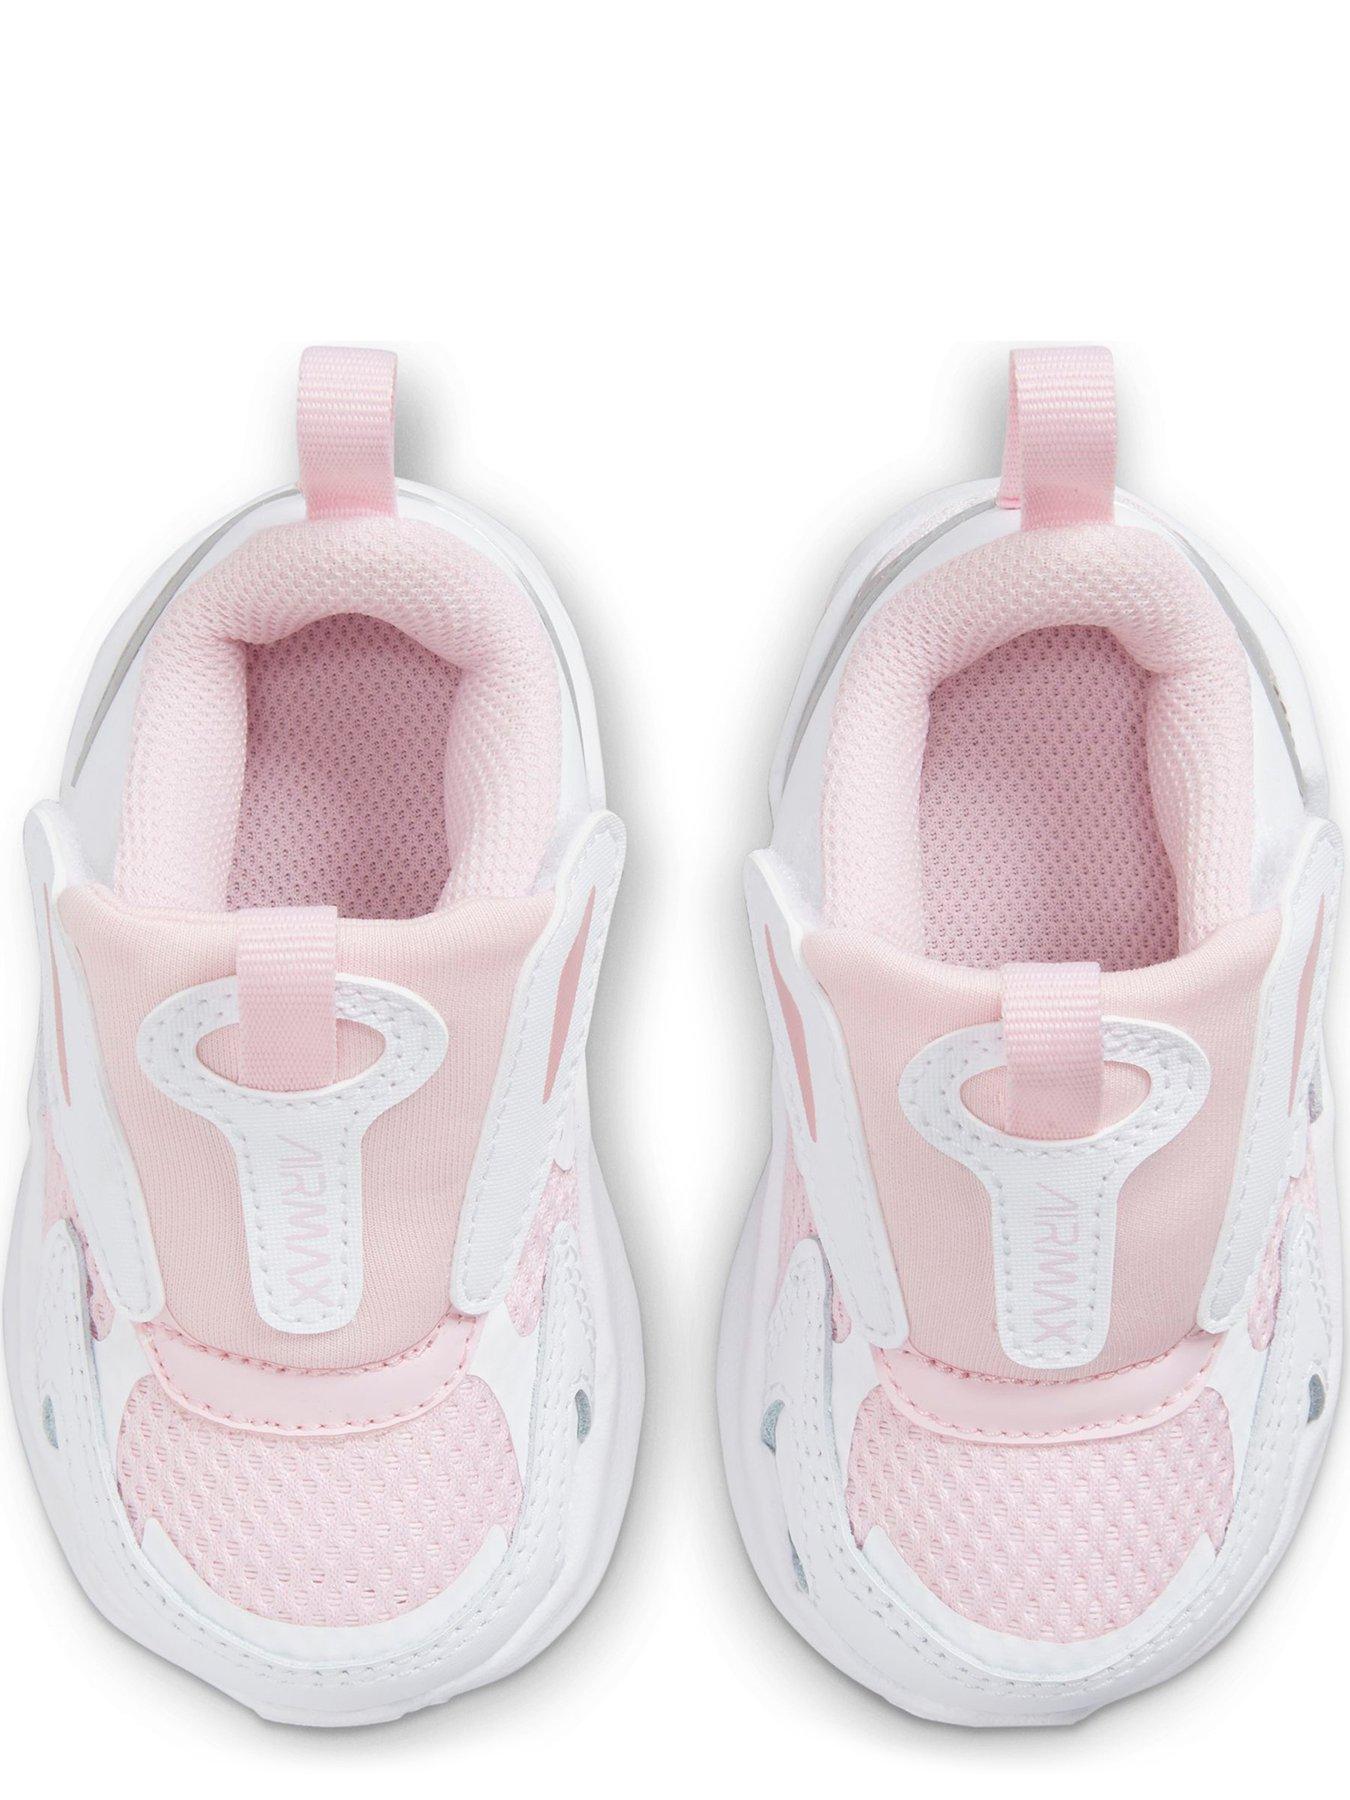 Trainers Air Max Bolt Infant Trainer - Pink/White